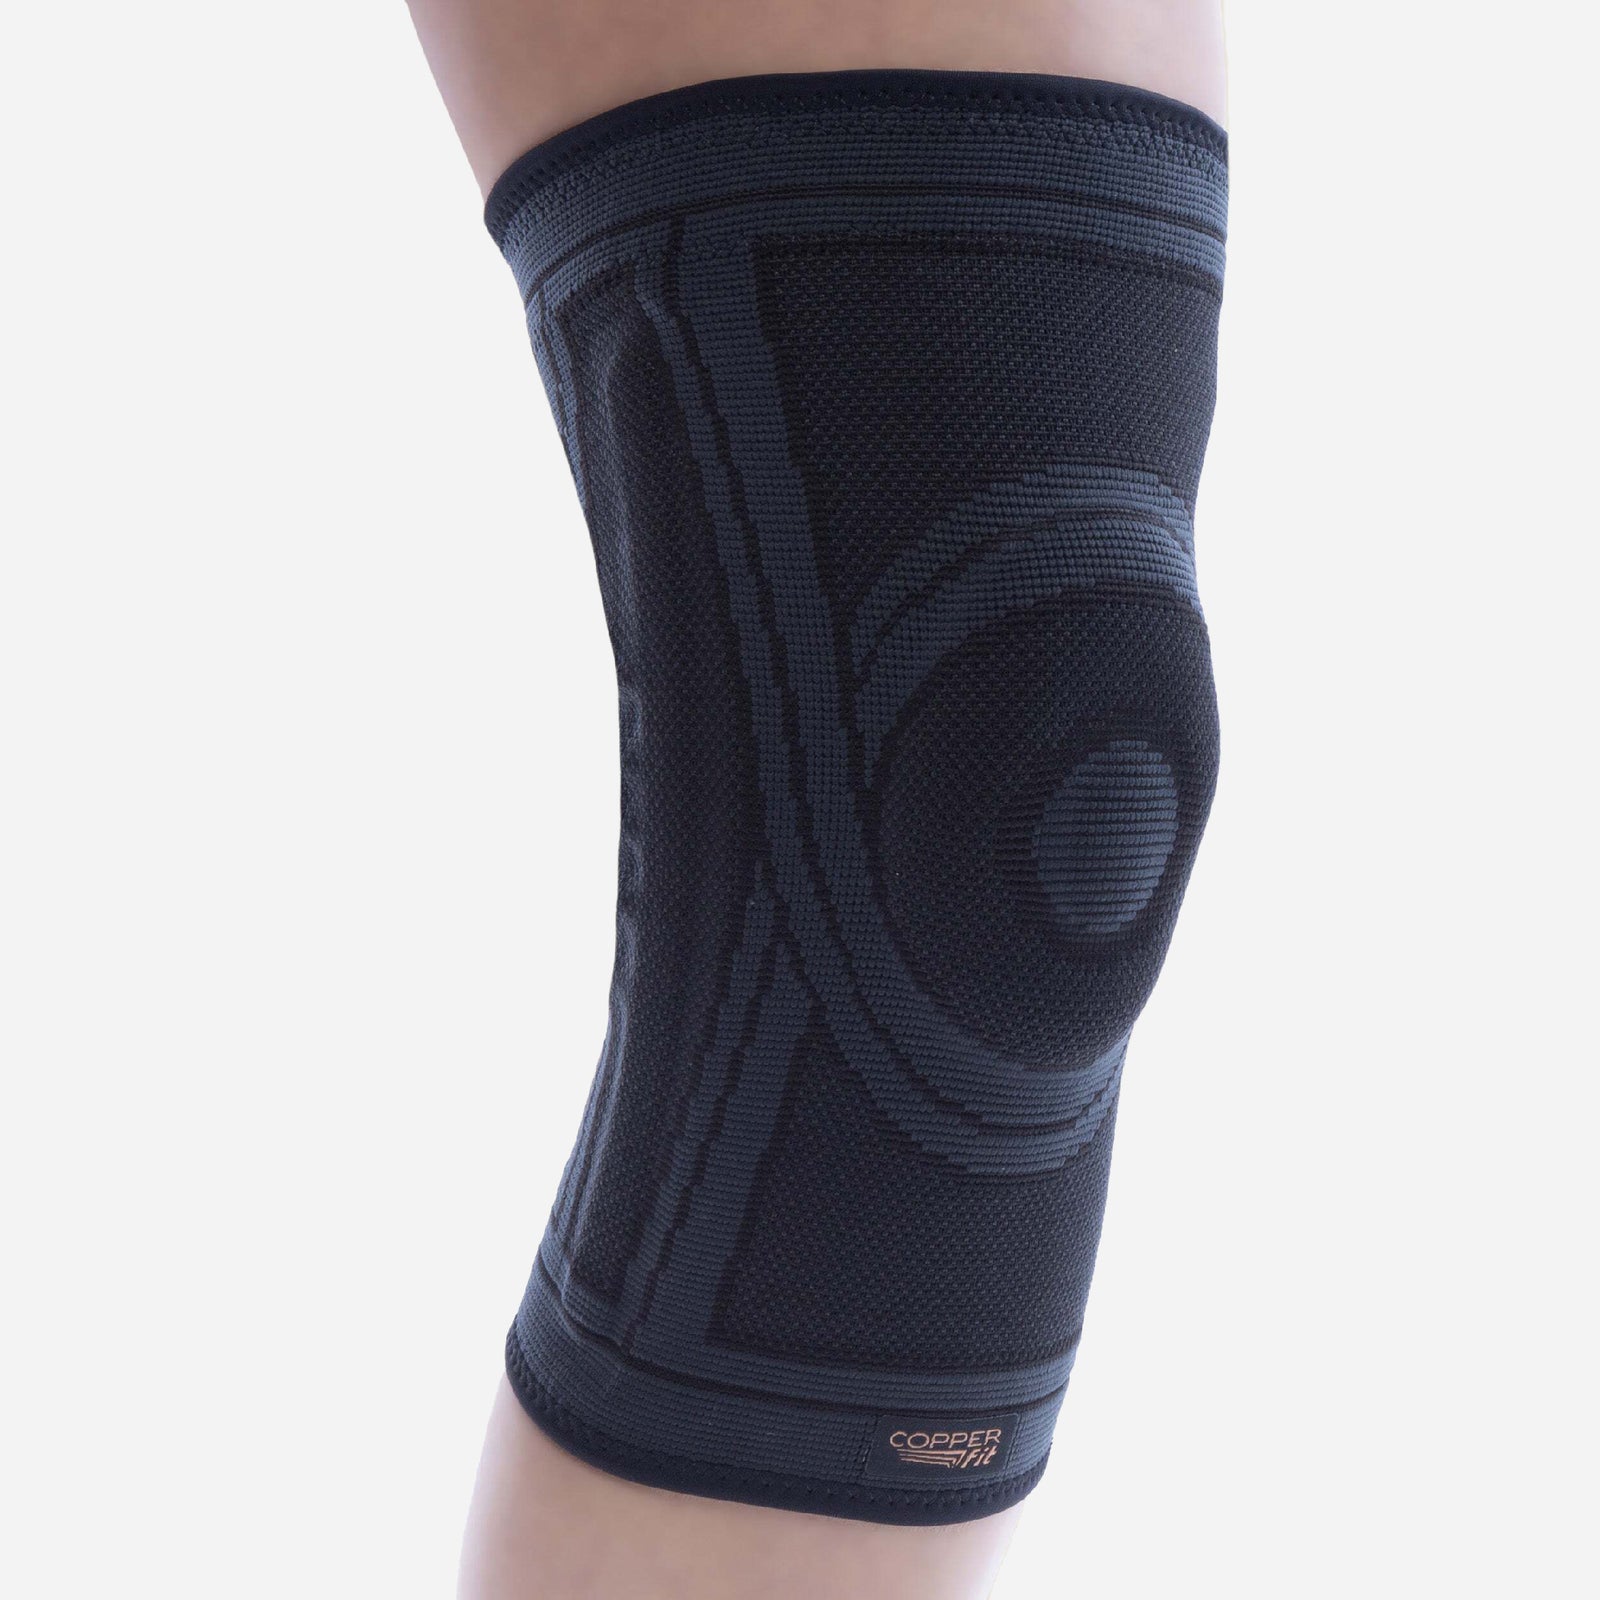 Buy Copper Fit Pro Series Performance Compression Knee Sleeve, Black with  Copper Trim, XX-Large Online at Low Prices in India 